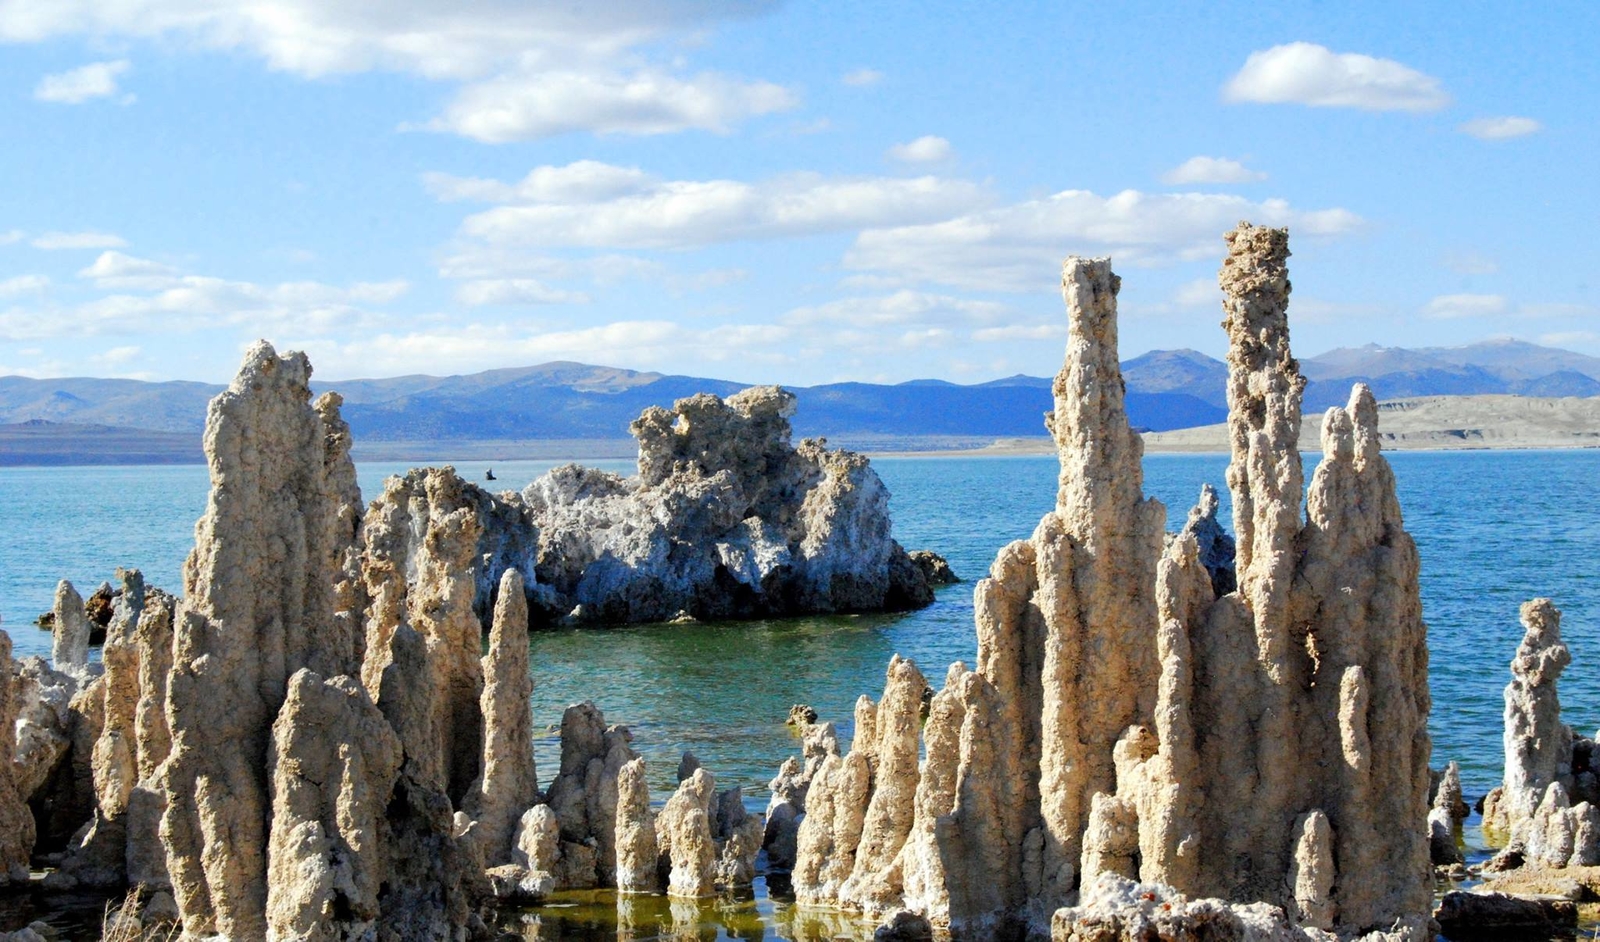 Mono Lake, California, with salt pillars known as "tufas" visible. JPL scientists tested new methods for detecting chemical signatures of life in the salty waters here, believing them to be analogs for water on Mars or ocean worlds like Europa.